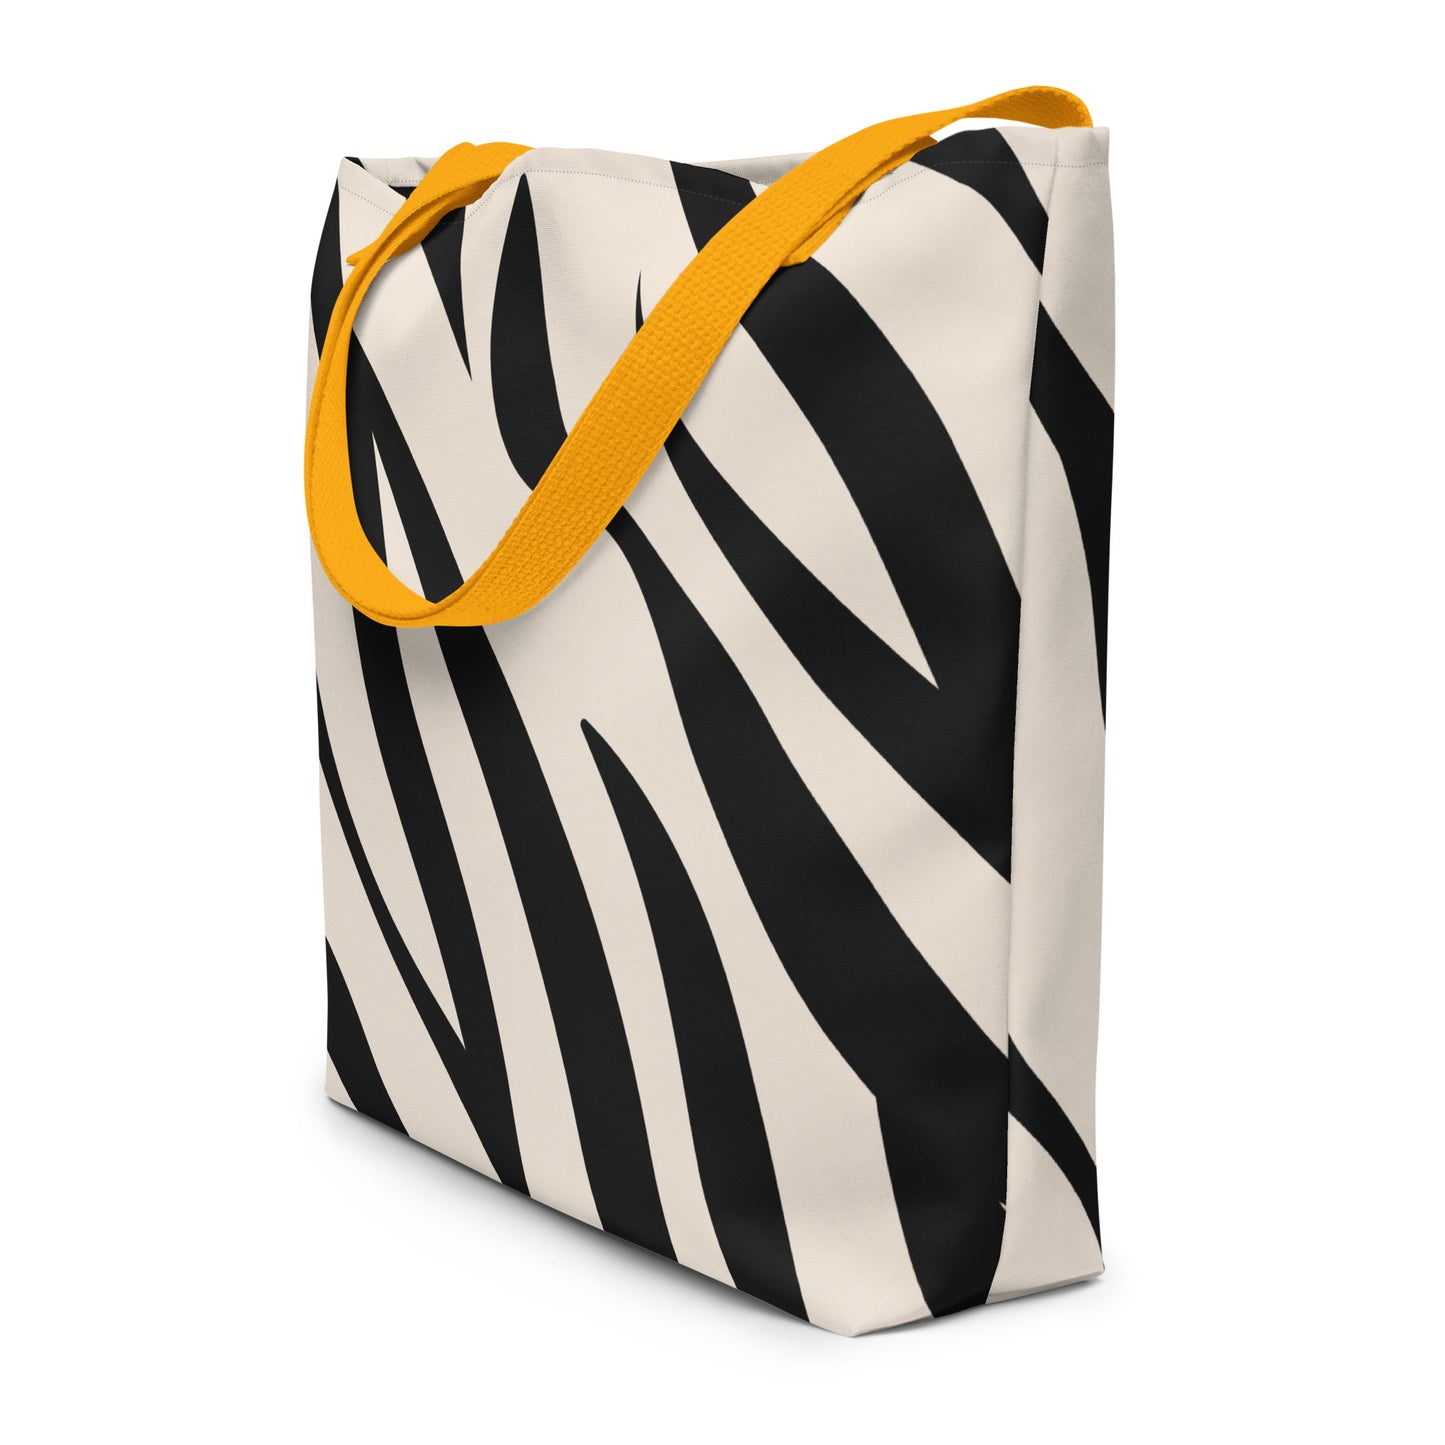 Wild Thing Tote